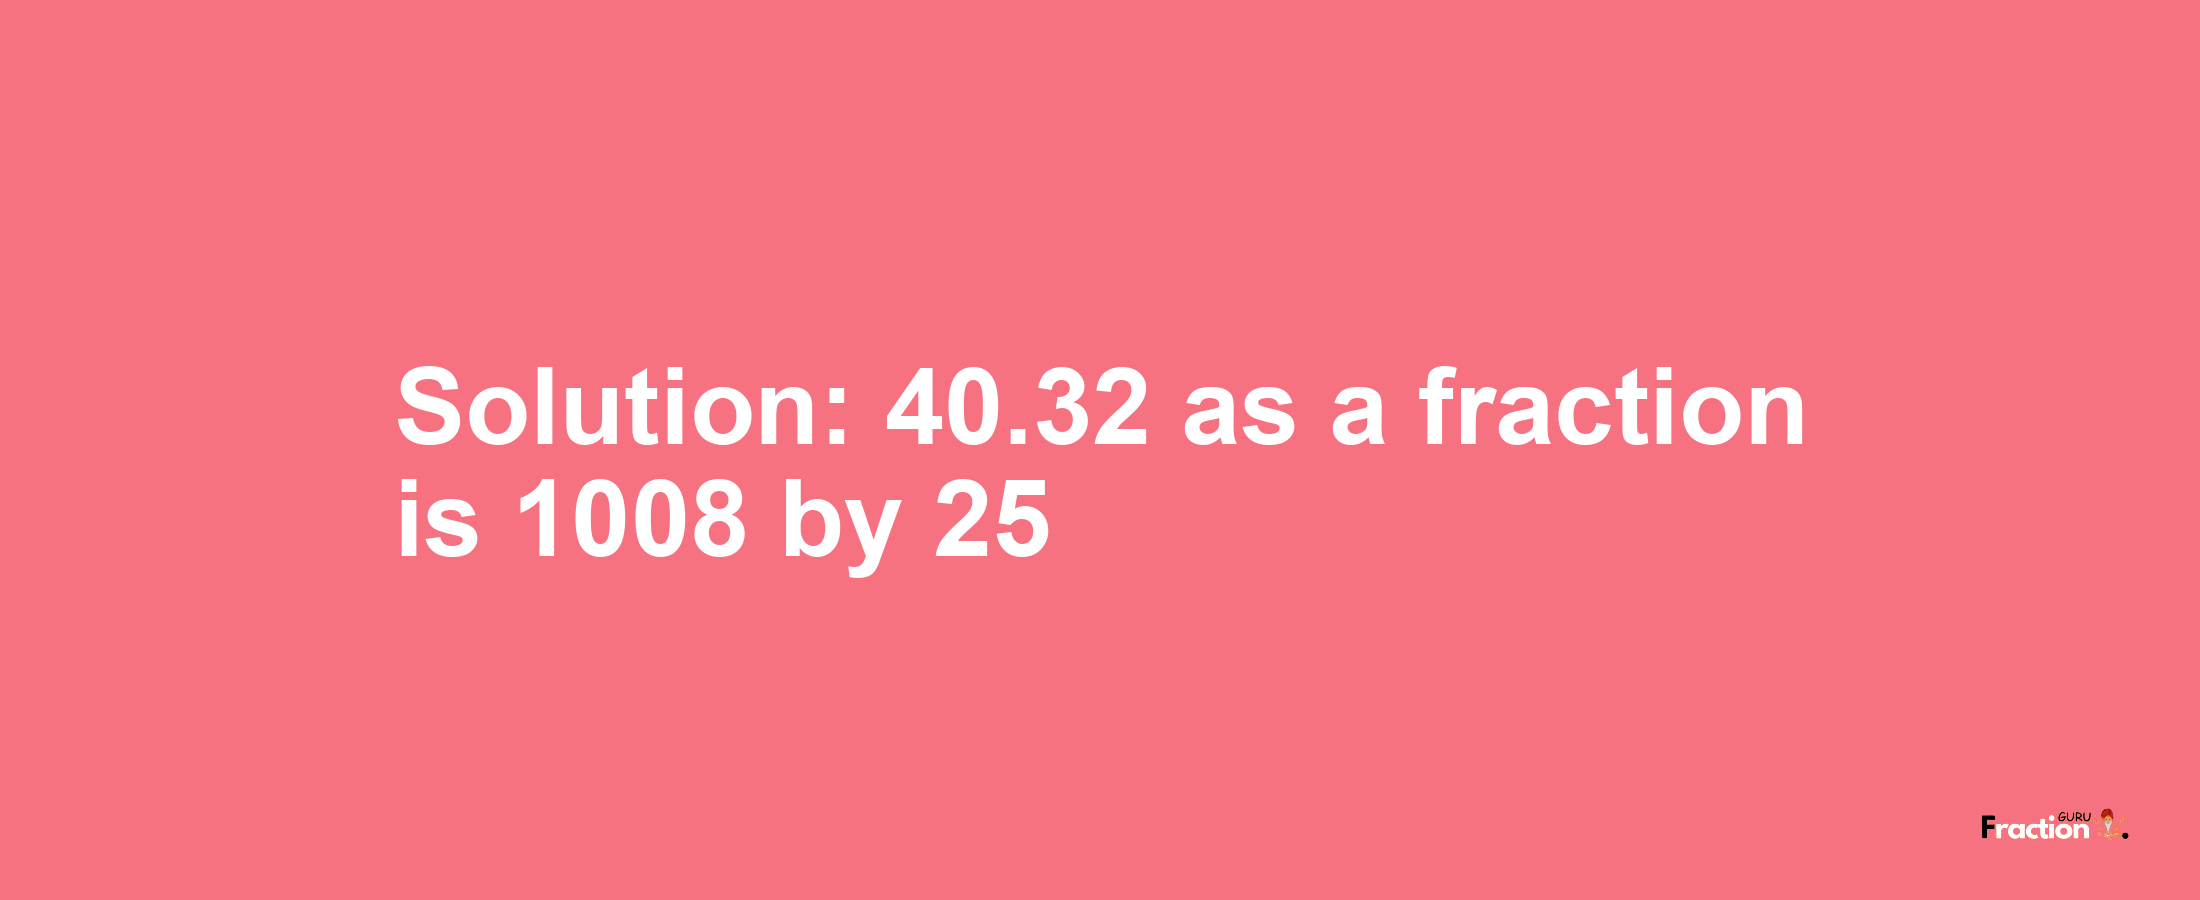 Solution:40.32 as a fraction is 1008/25